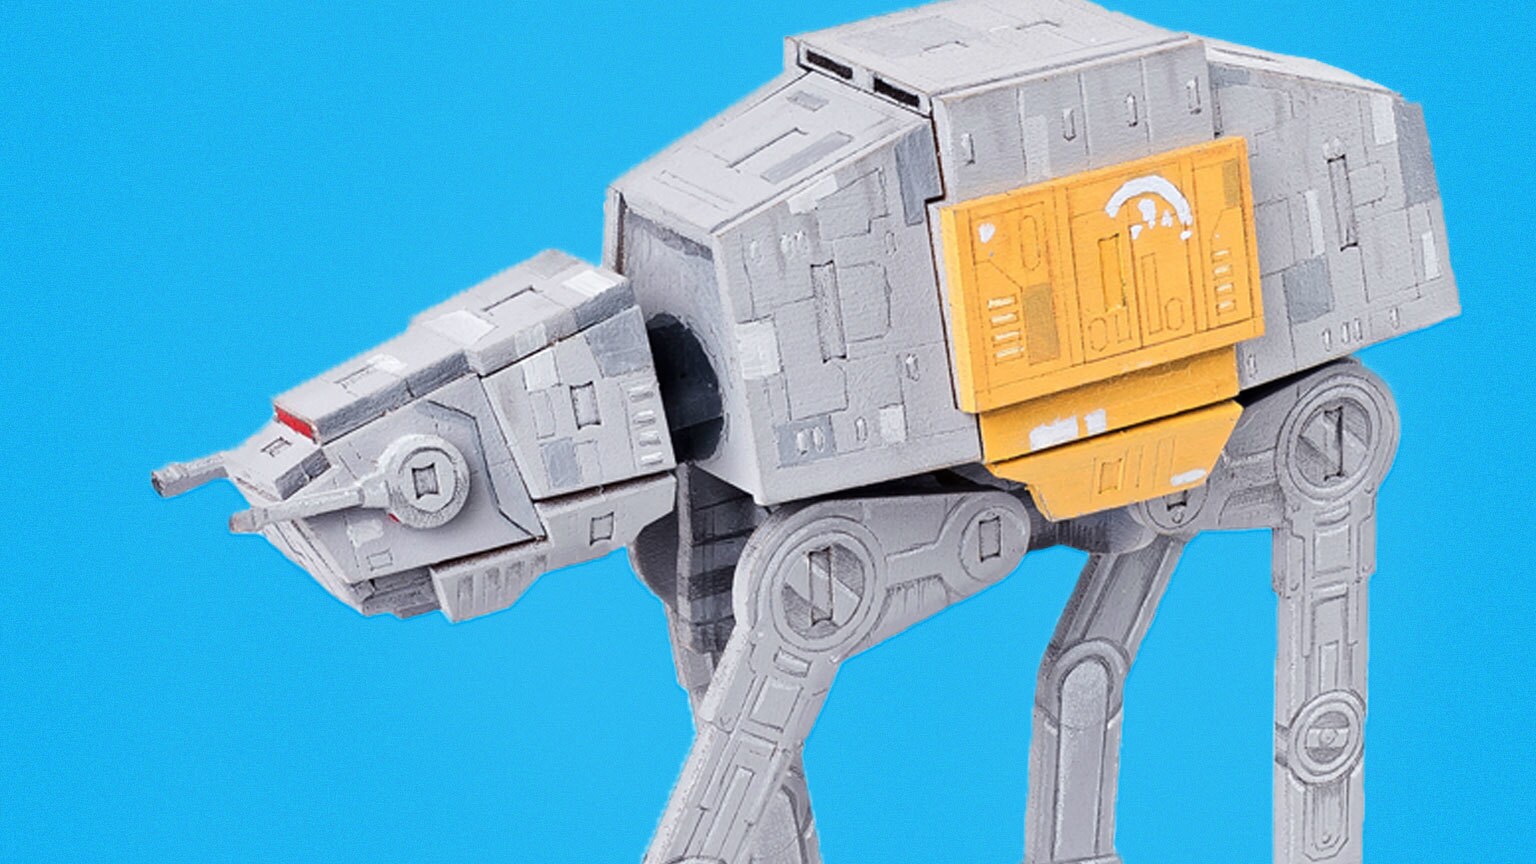 6 Behind-the-Scenes Details of the Rogue One IncrediBuilds Book and Model Sets